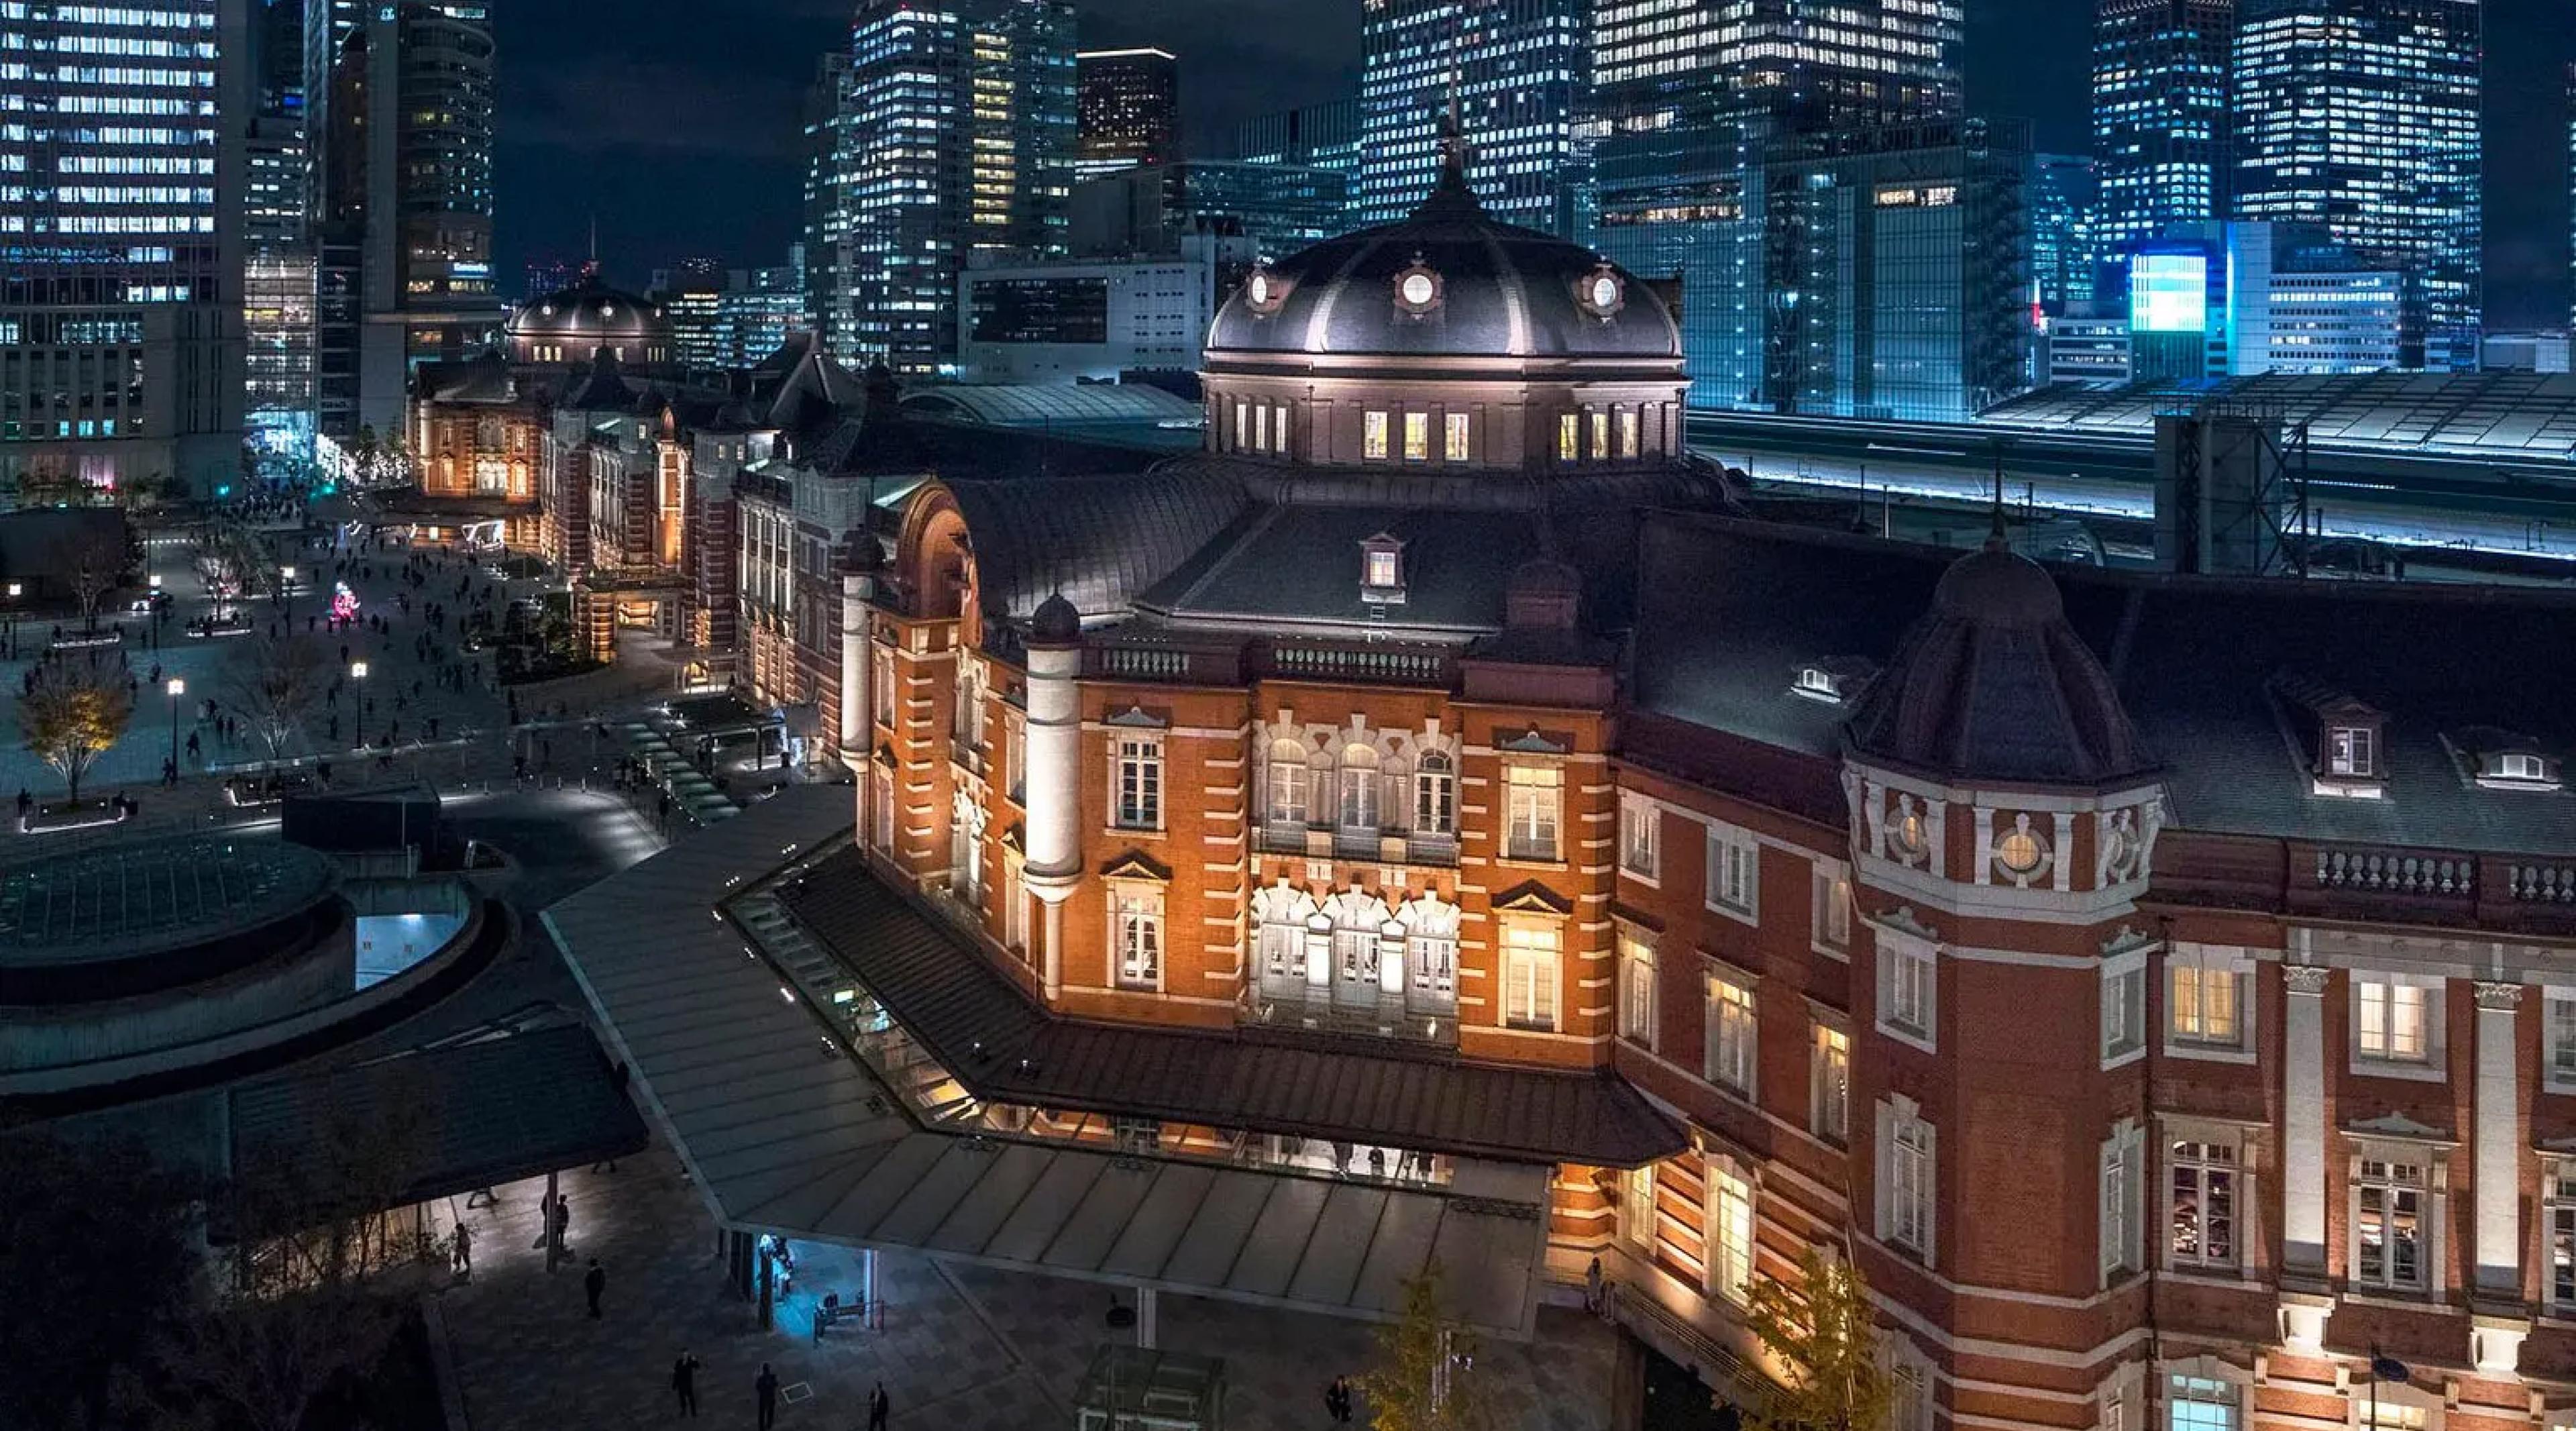 top:carouselSection.tokyoStation.name